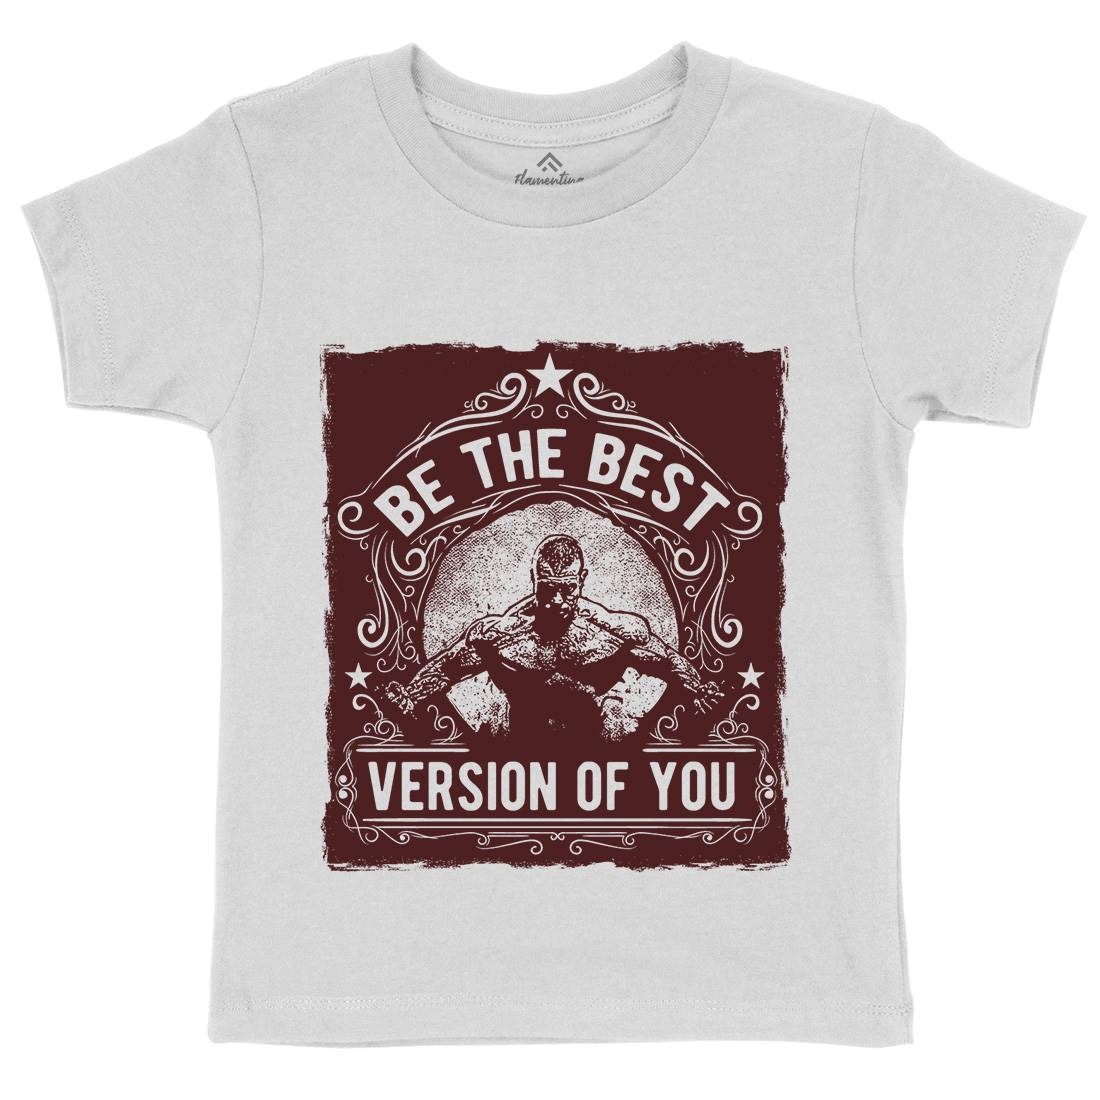 The Best Version Of You Kids Crew Neck T-Shirt Gym C985